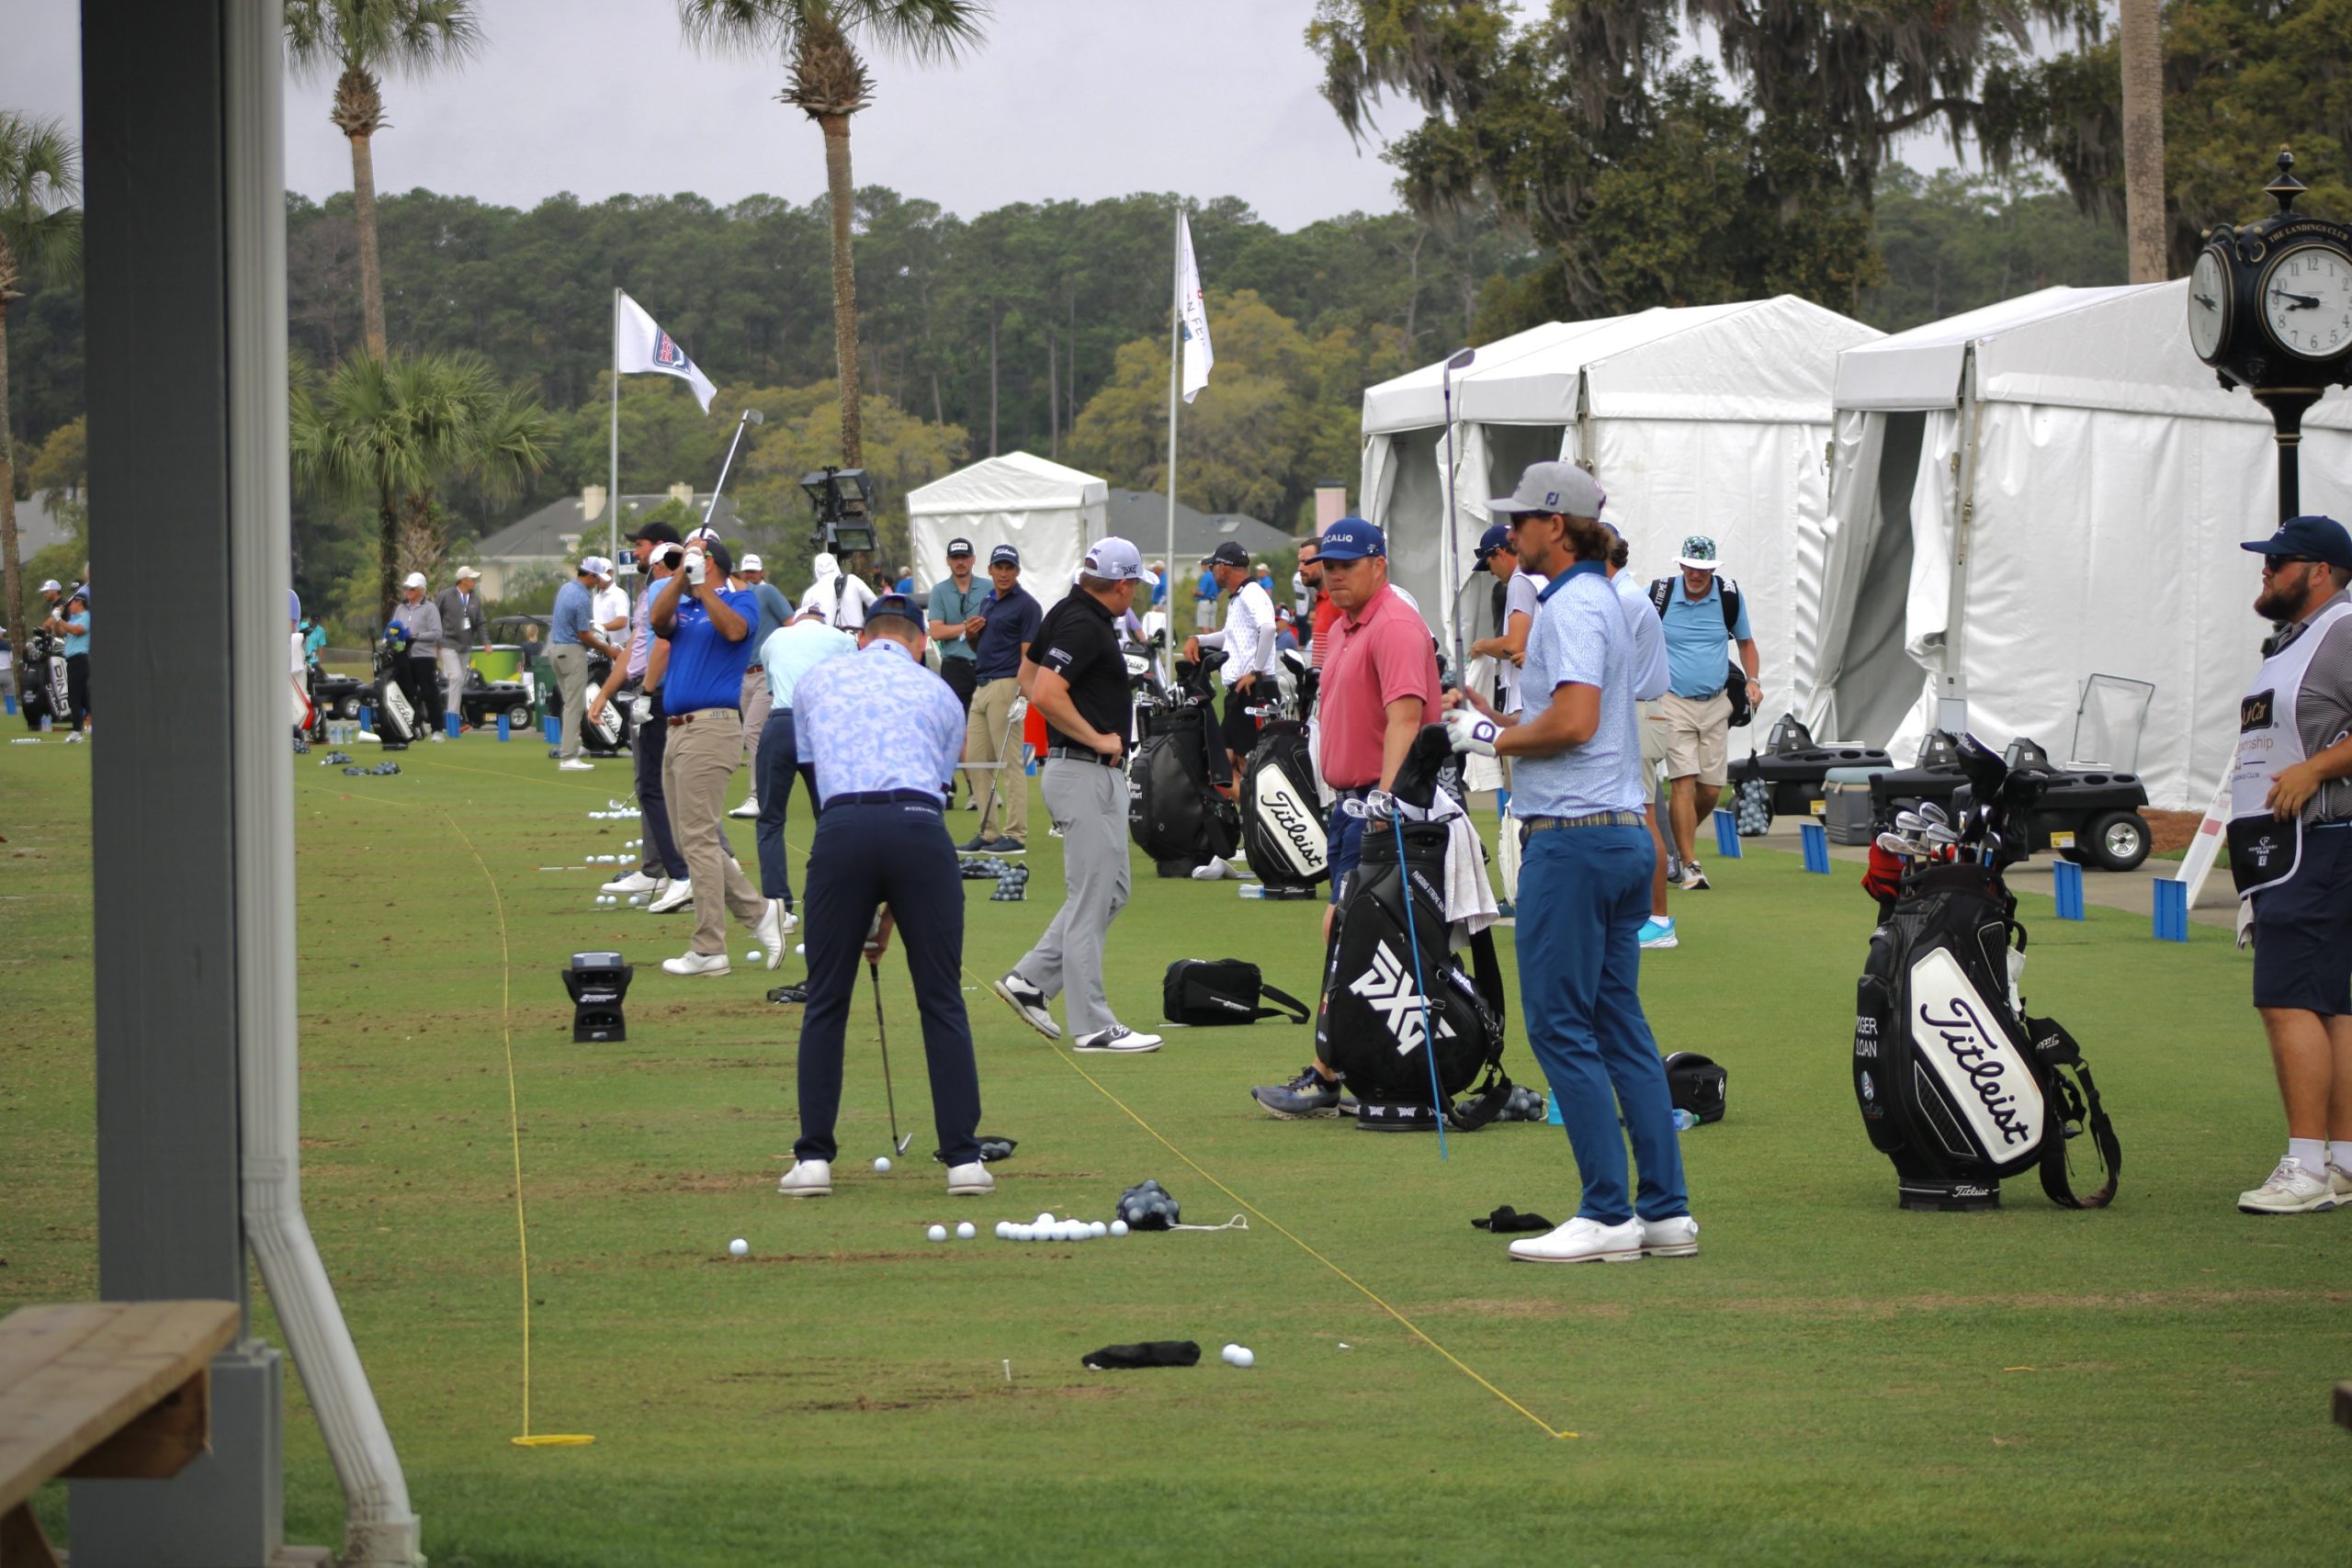 Players take practice shots before teeing off.